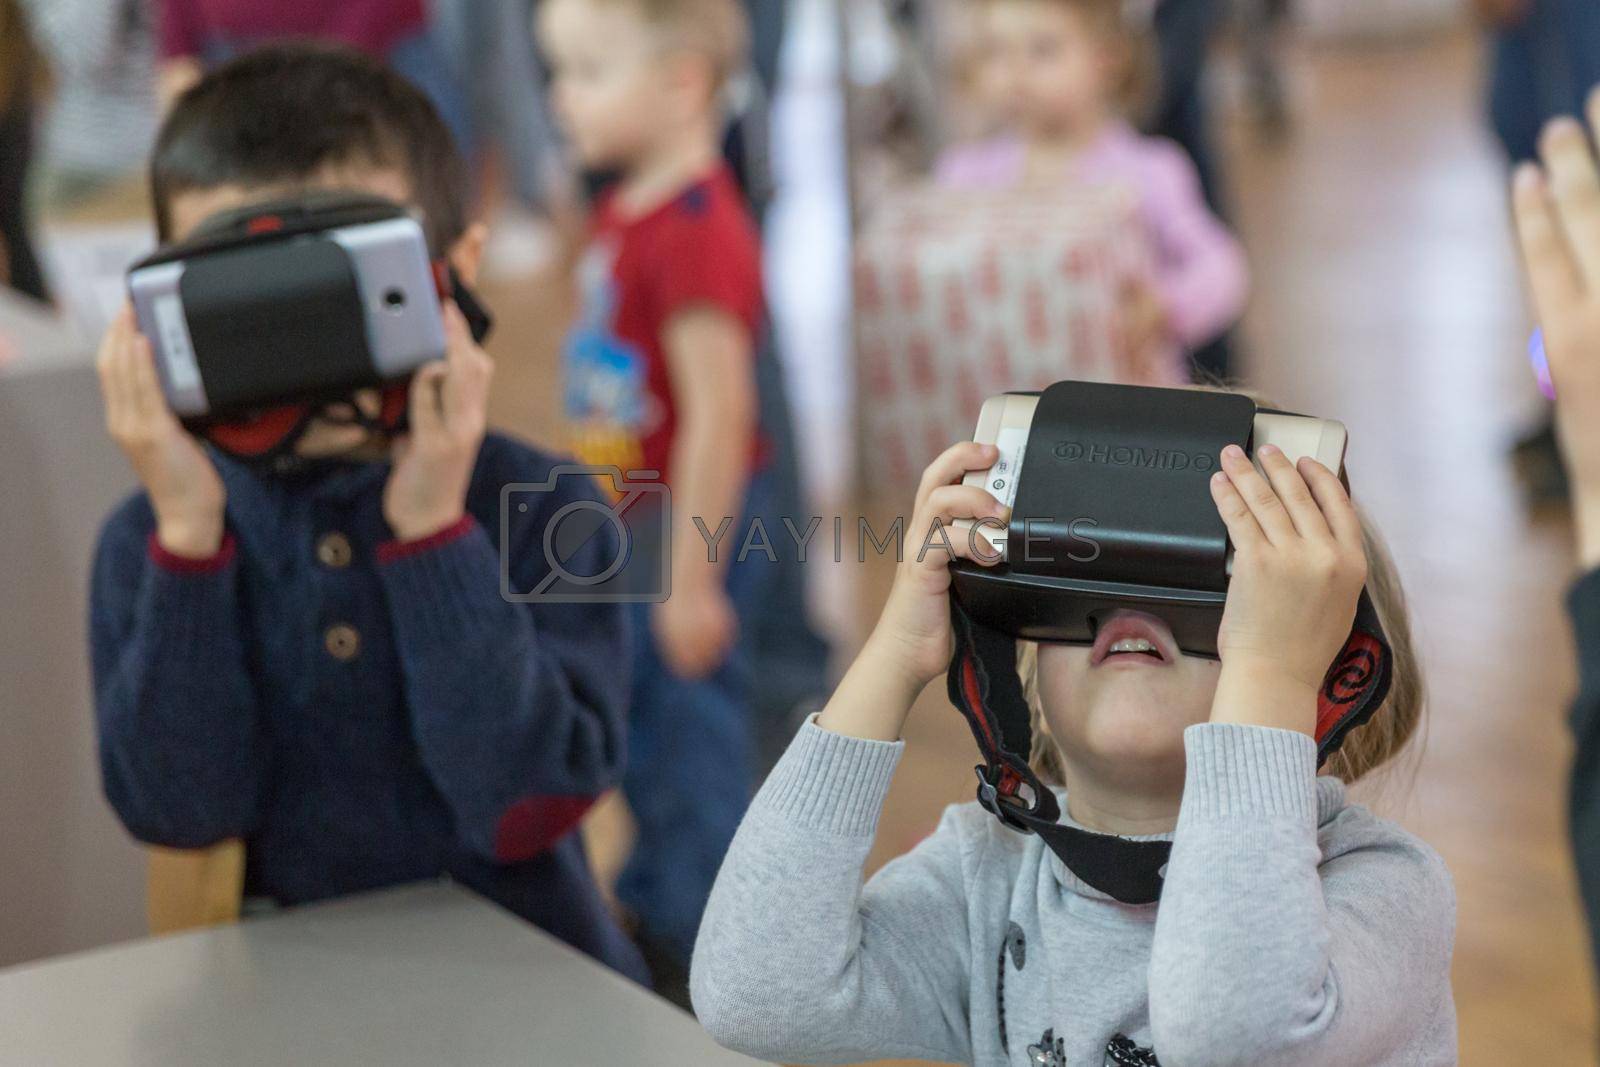 STAVROPOL, RUSSIA - APRIL 6, 2019 - Children having fun with virtual reality headsets in modern robot museum